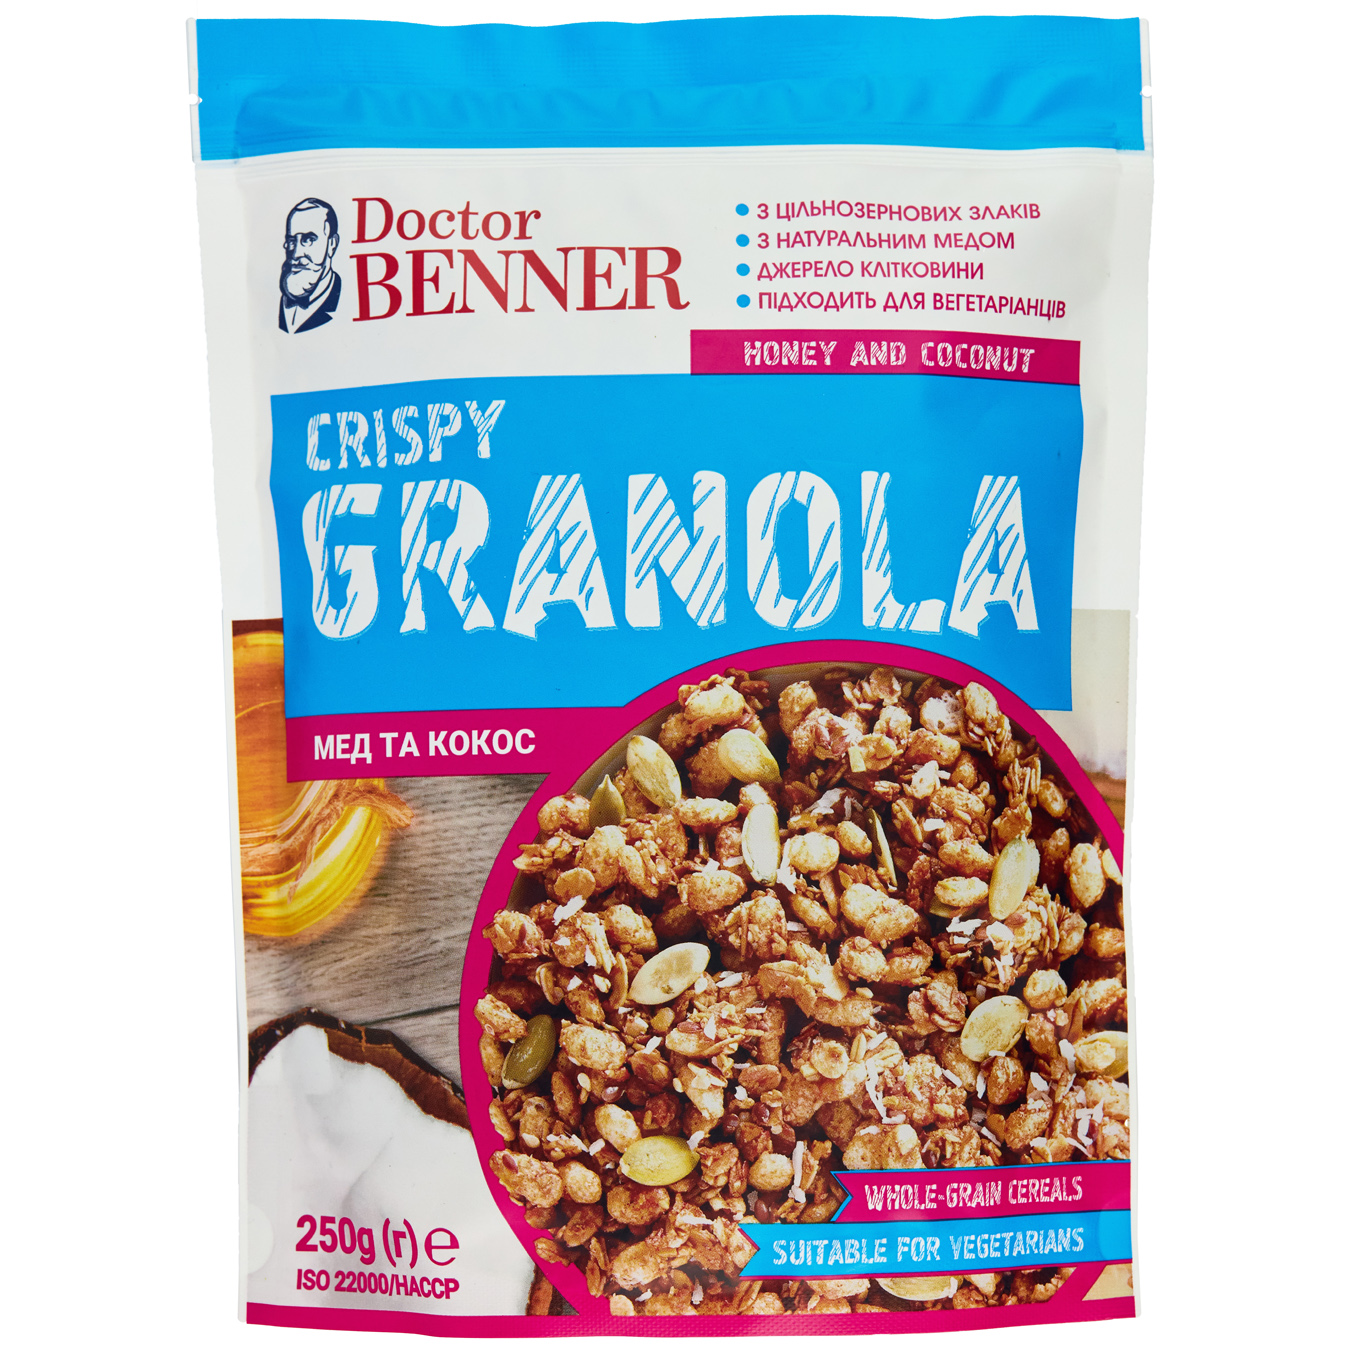 Doctor Benner Honey And Coconut Granola 250g